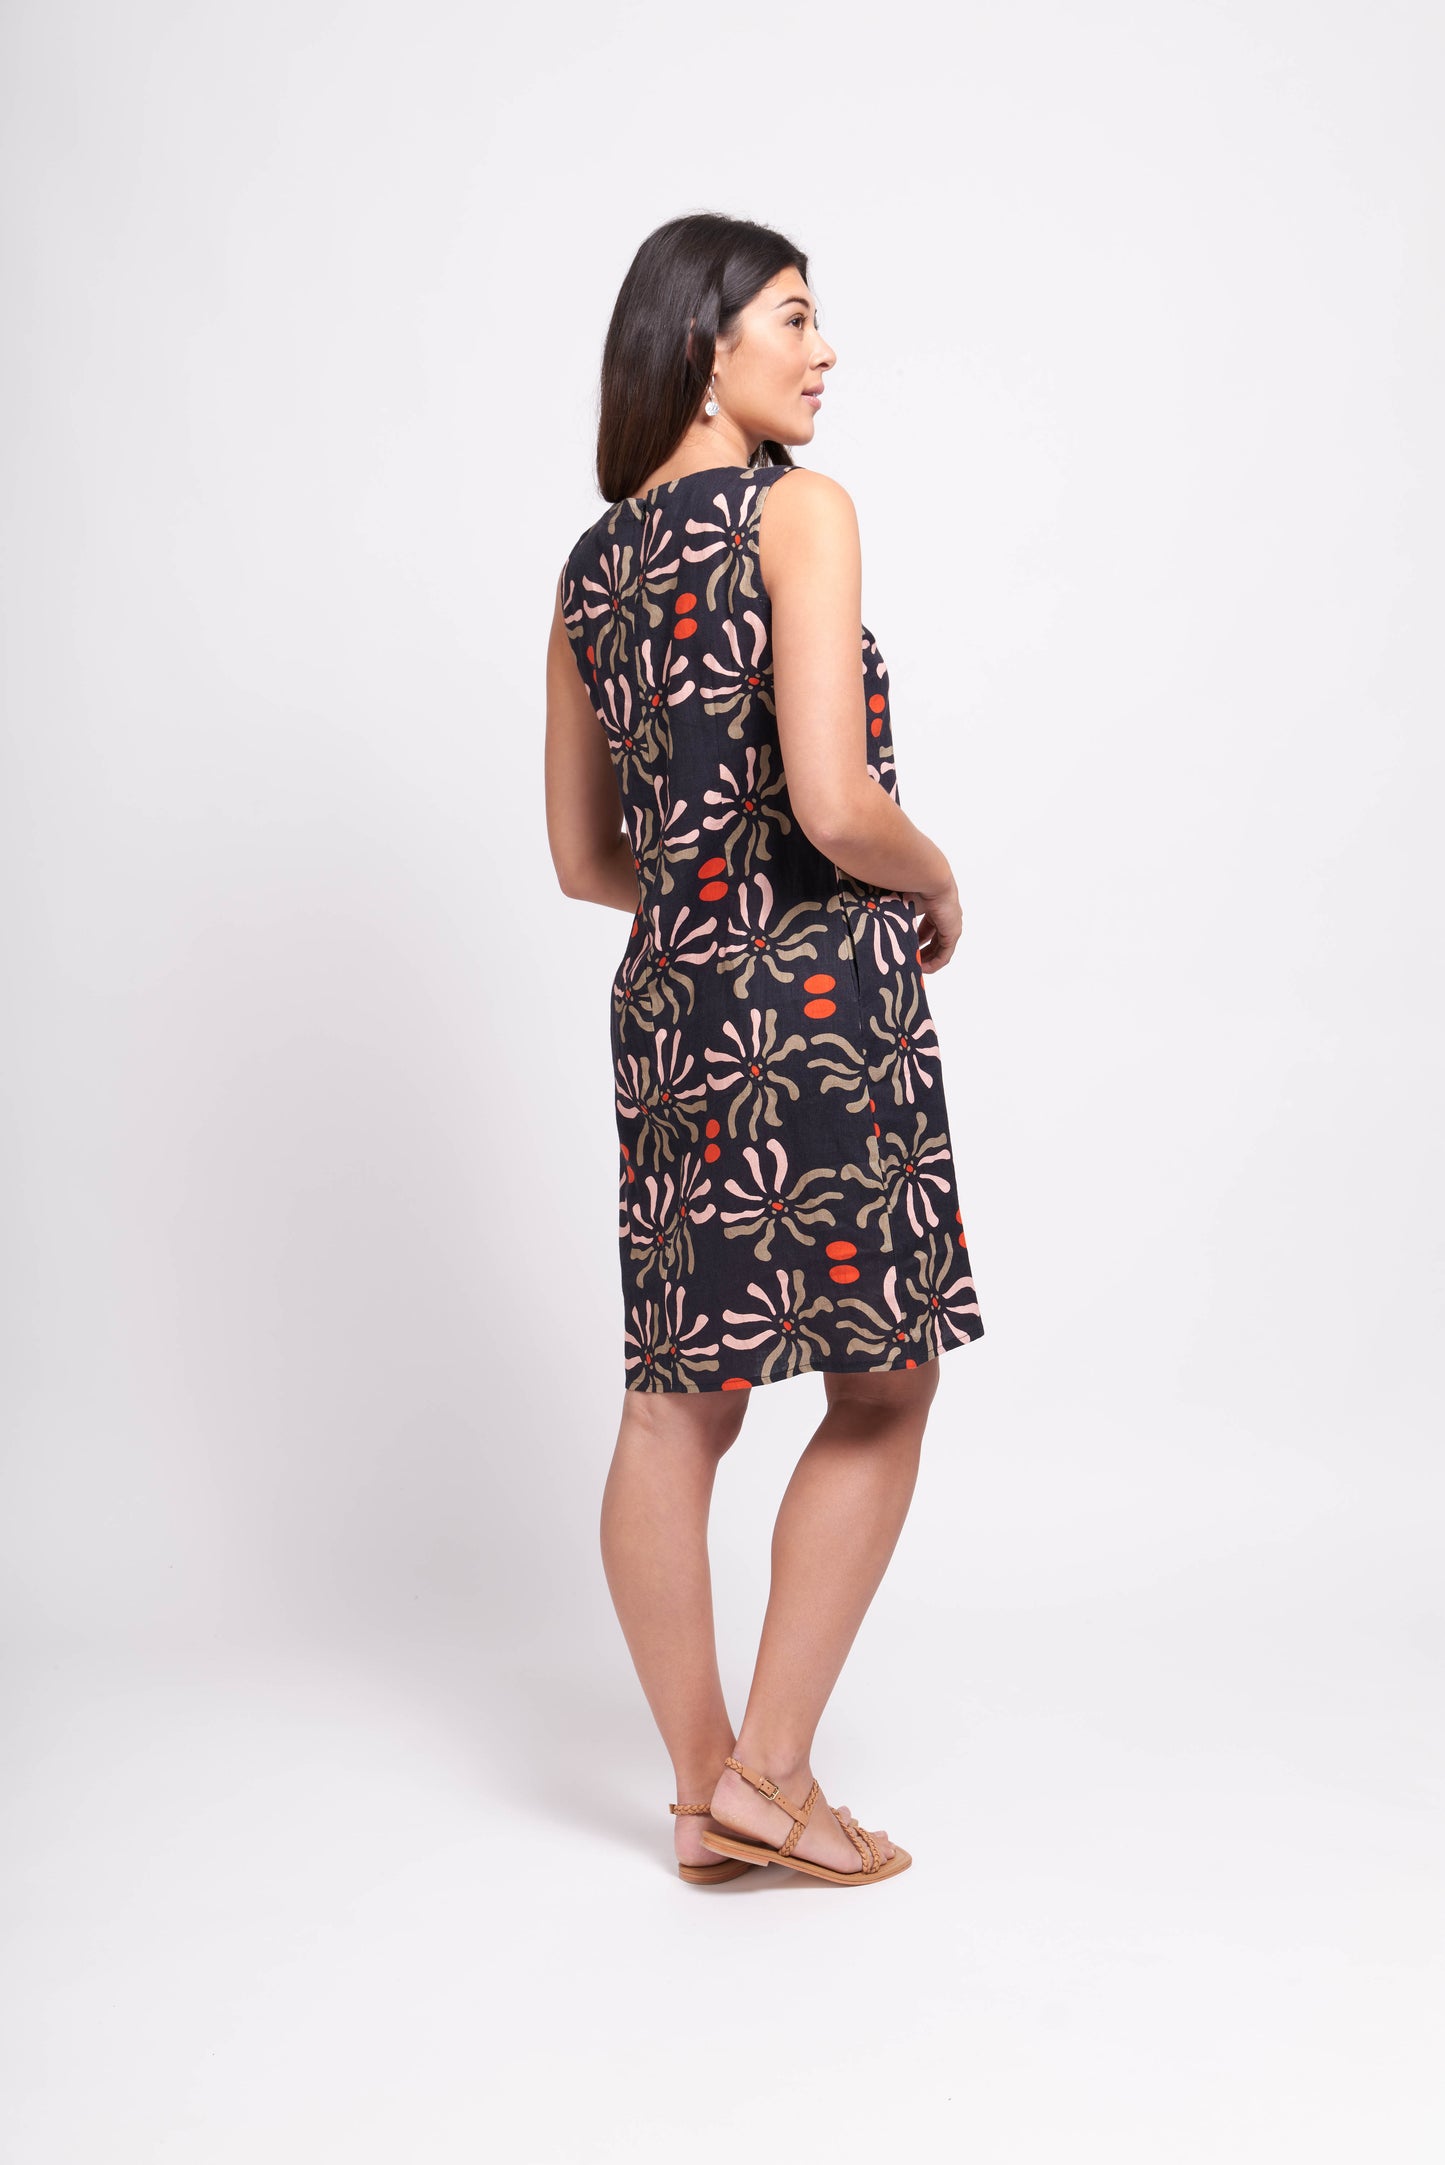 A woman in a Foil Floral Sun Keyhole Dress with Pockets and sandals standing against a white background.